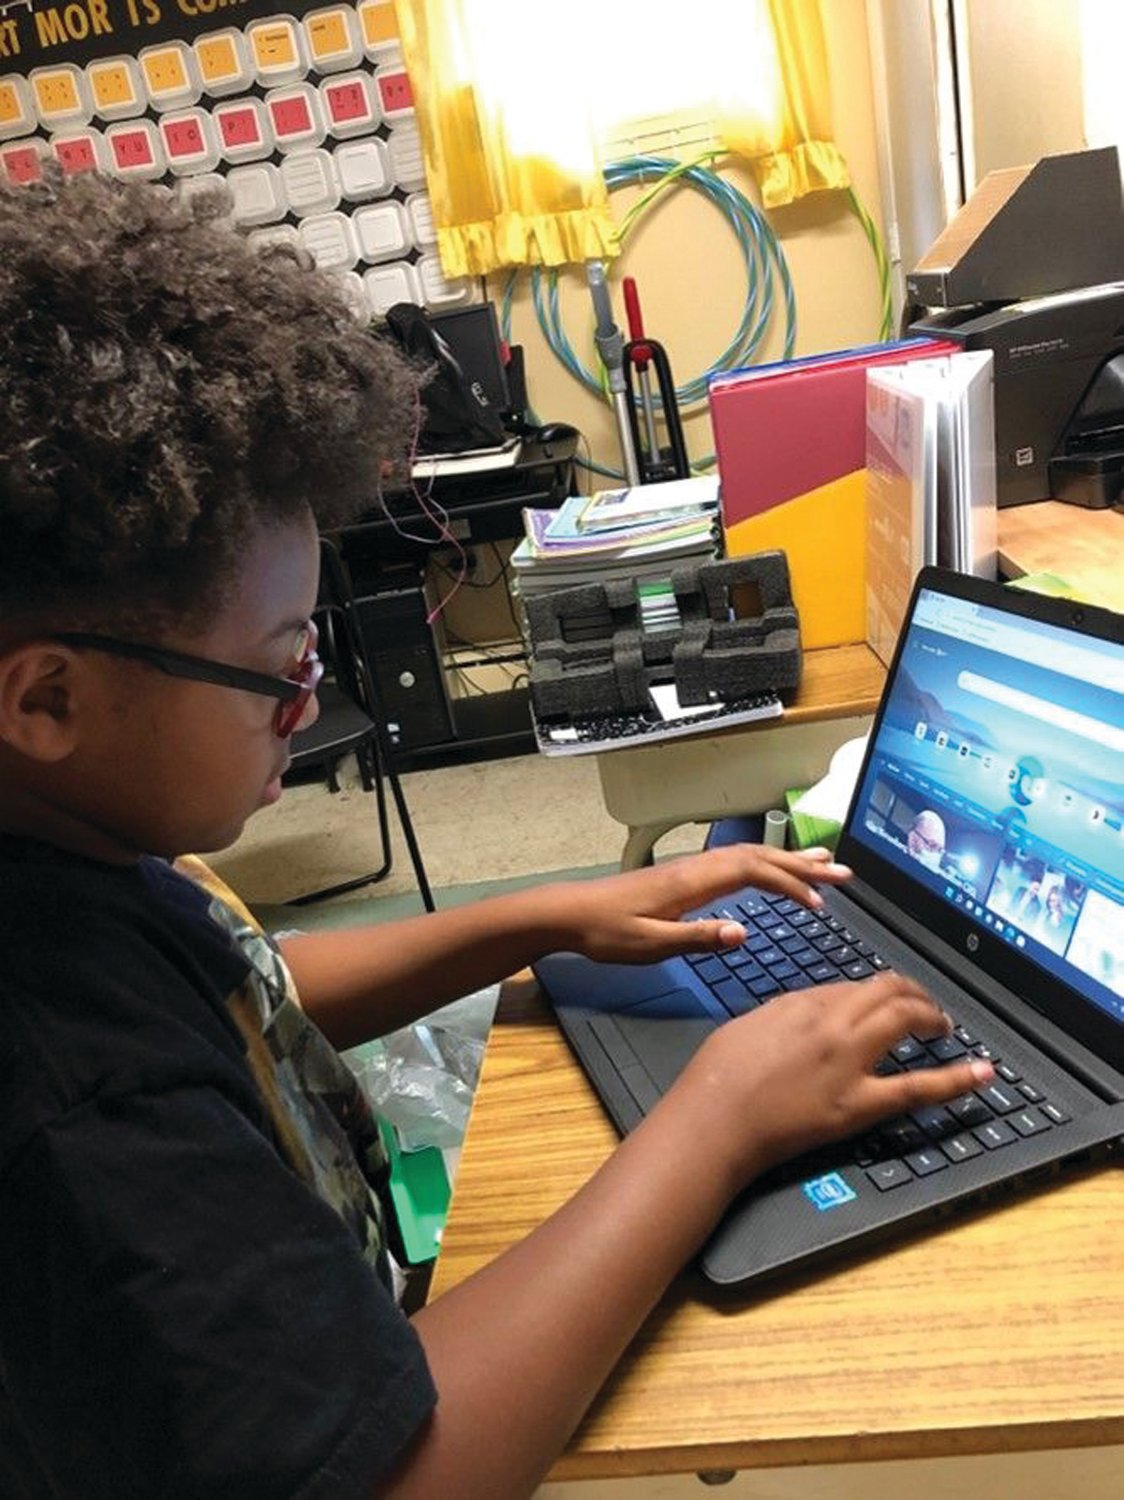 One of three laptop computers purchased by BCHG with VIA funding provides children with an important educational resource.